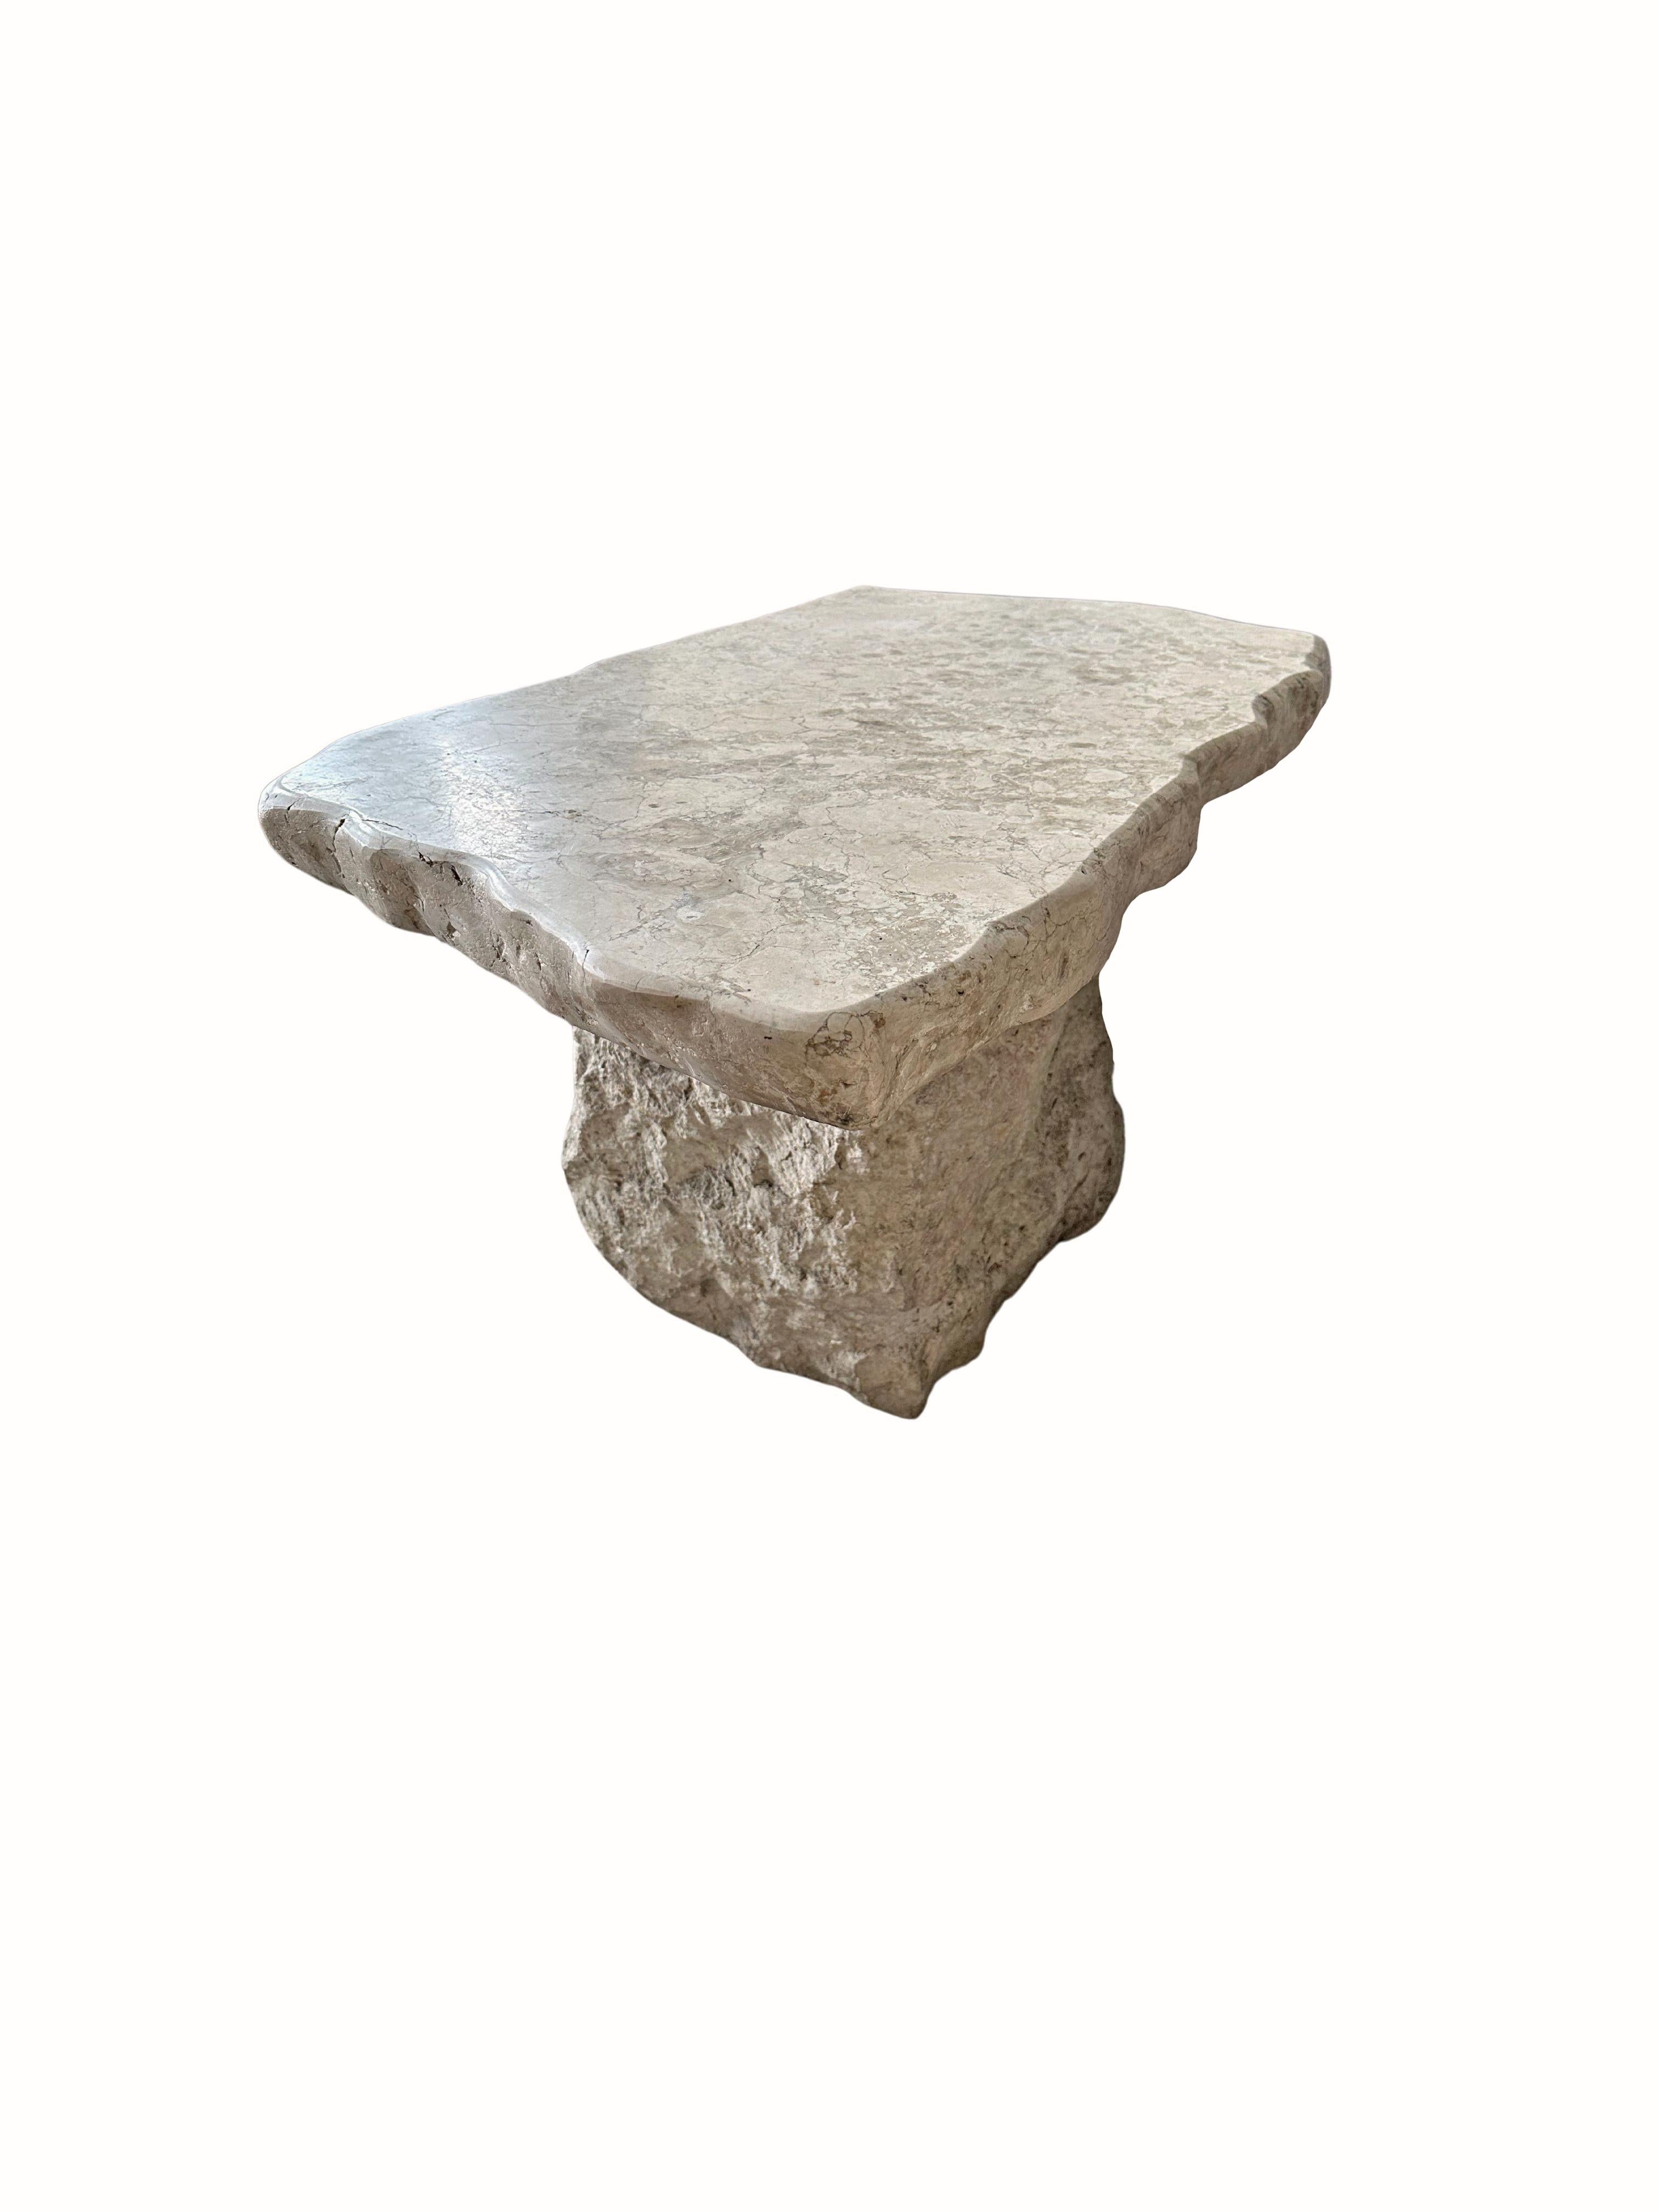 Contemporary Sculptural Marble Table, Modern Organic